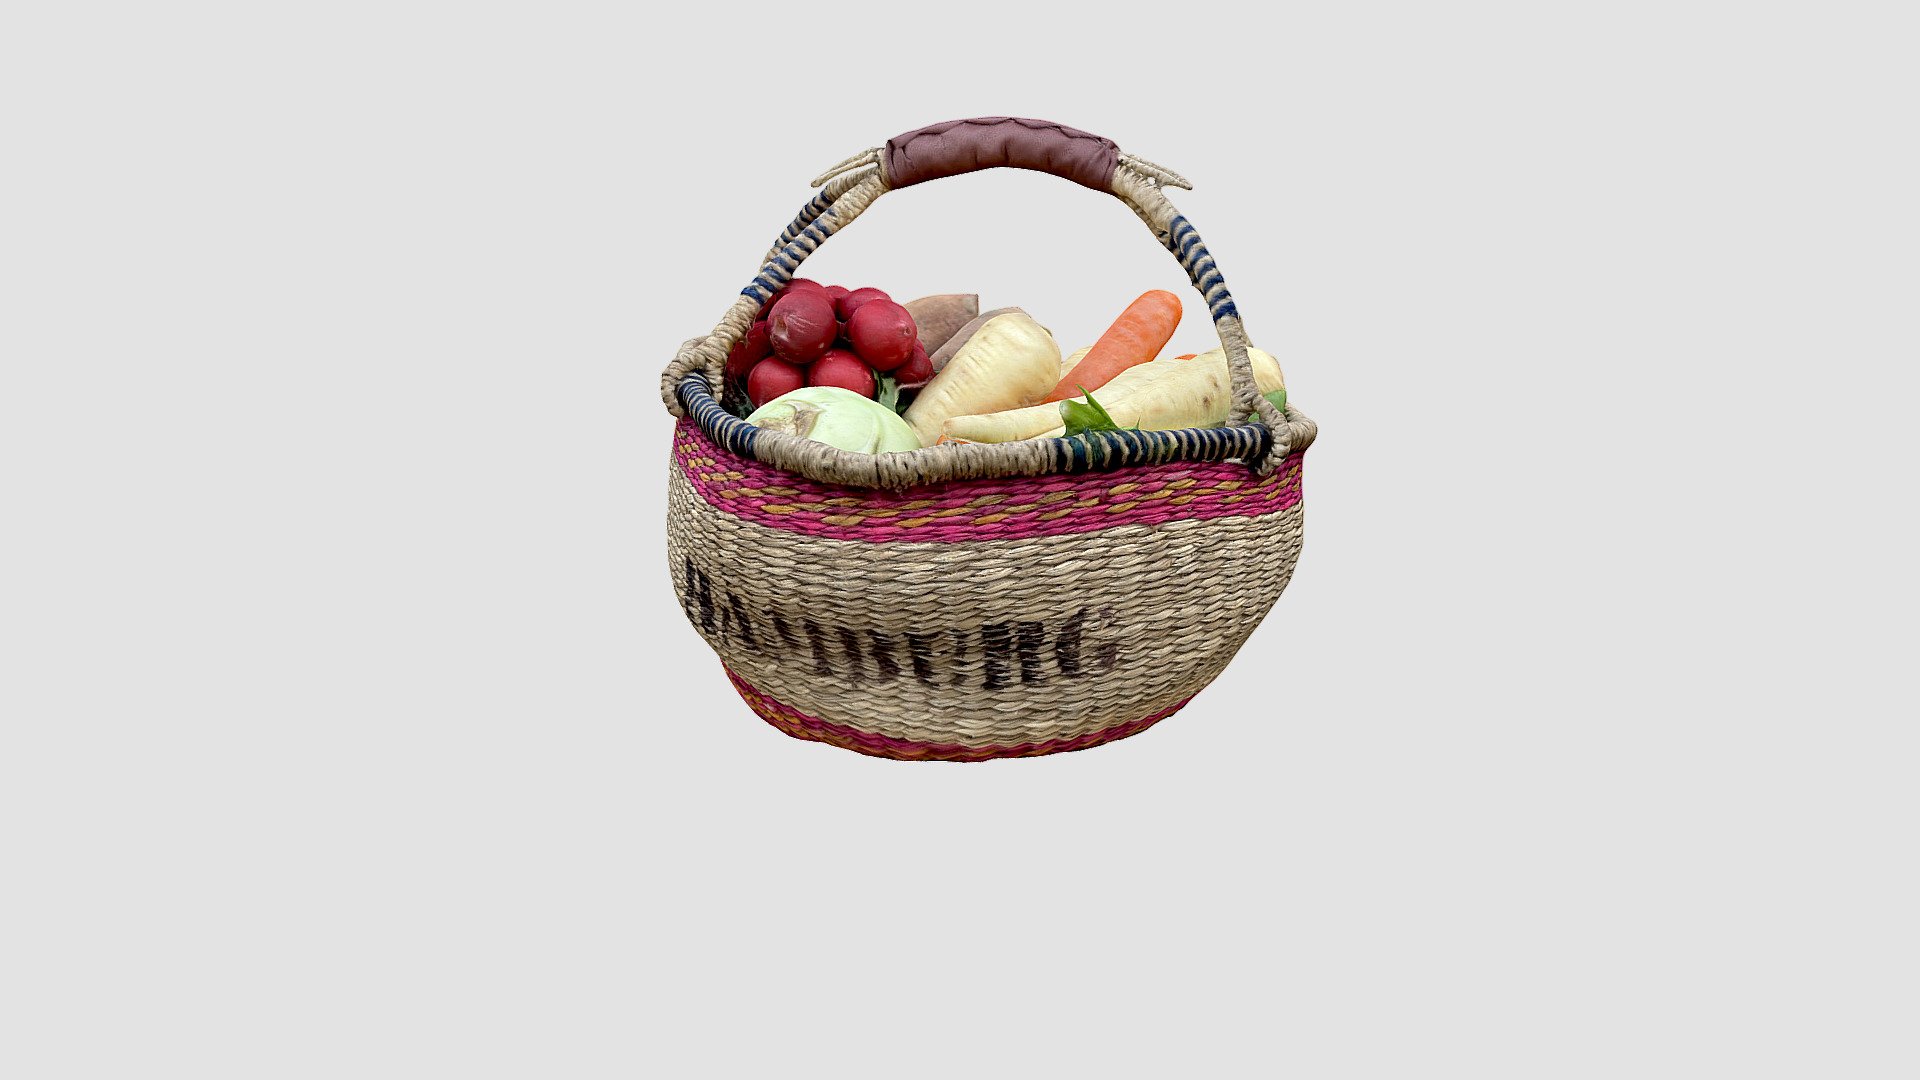 Vegetable basket from the local market including various size of vegetables.

Check my AR/VR recipes and support me on Patreon - Vegetable basket - Buy Royalty Free 3D model by Zoltanfood 3d model